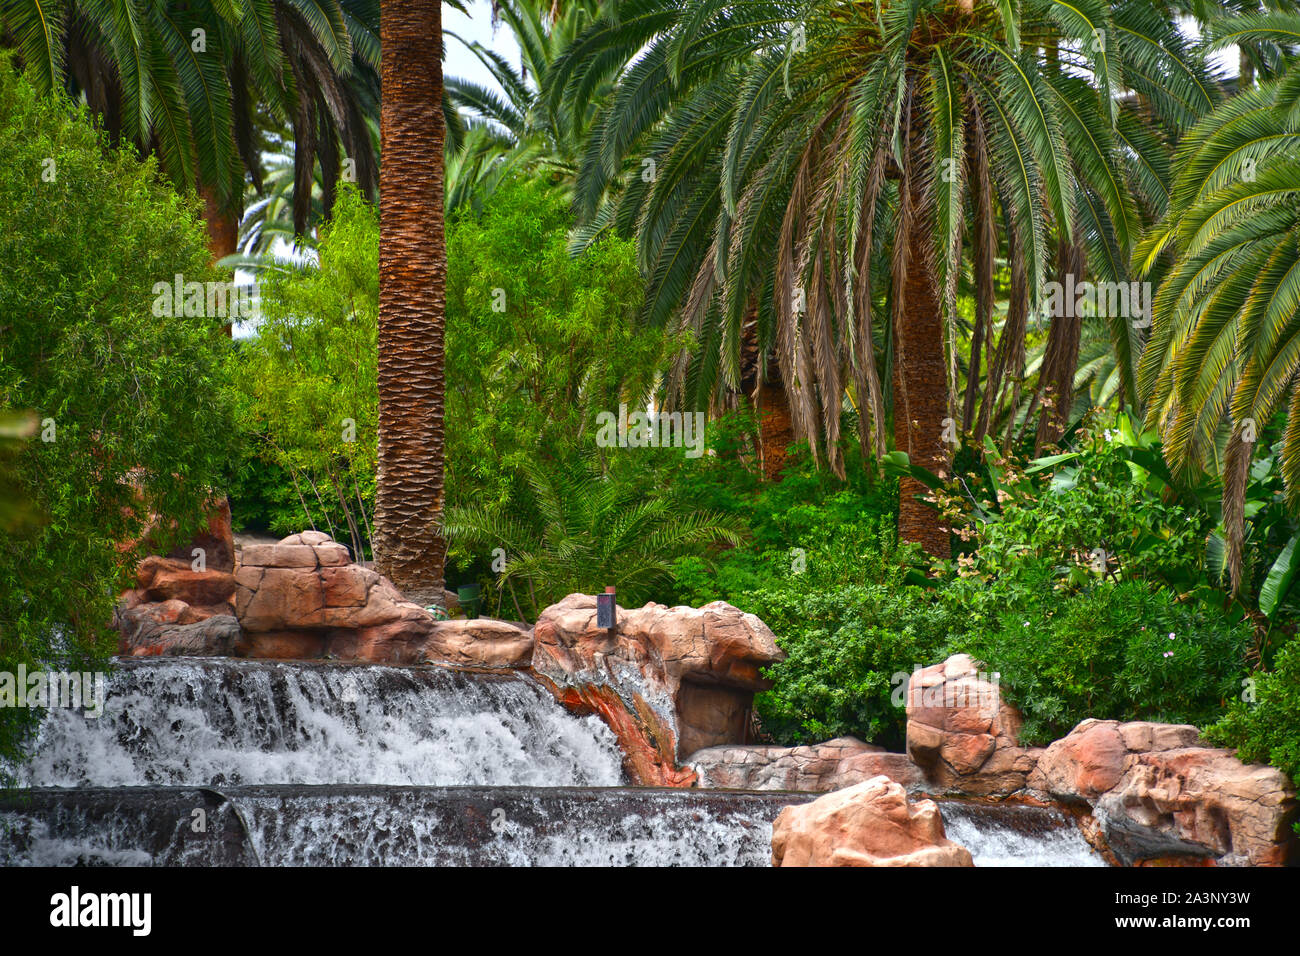 Las Vegas Nevada, USA October 2, 2018: This is the tropical oasis of the Mirage Resort & Casino hotel located on Las Vegas Strip Stock Photo